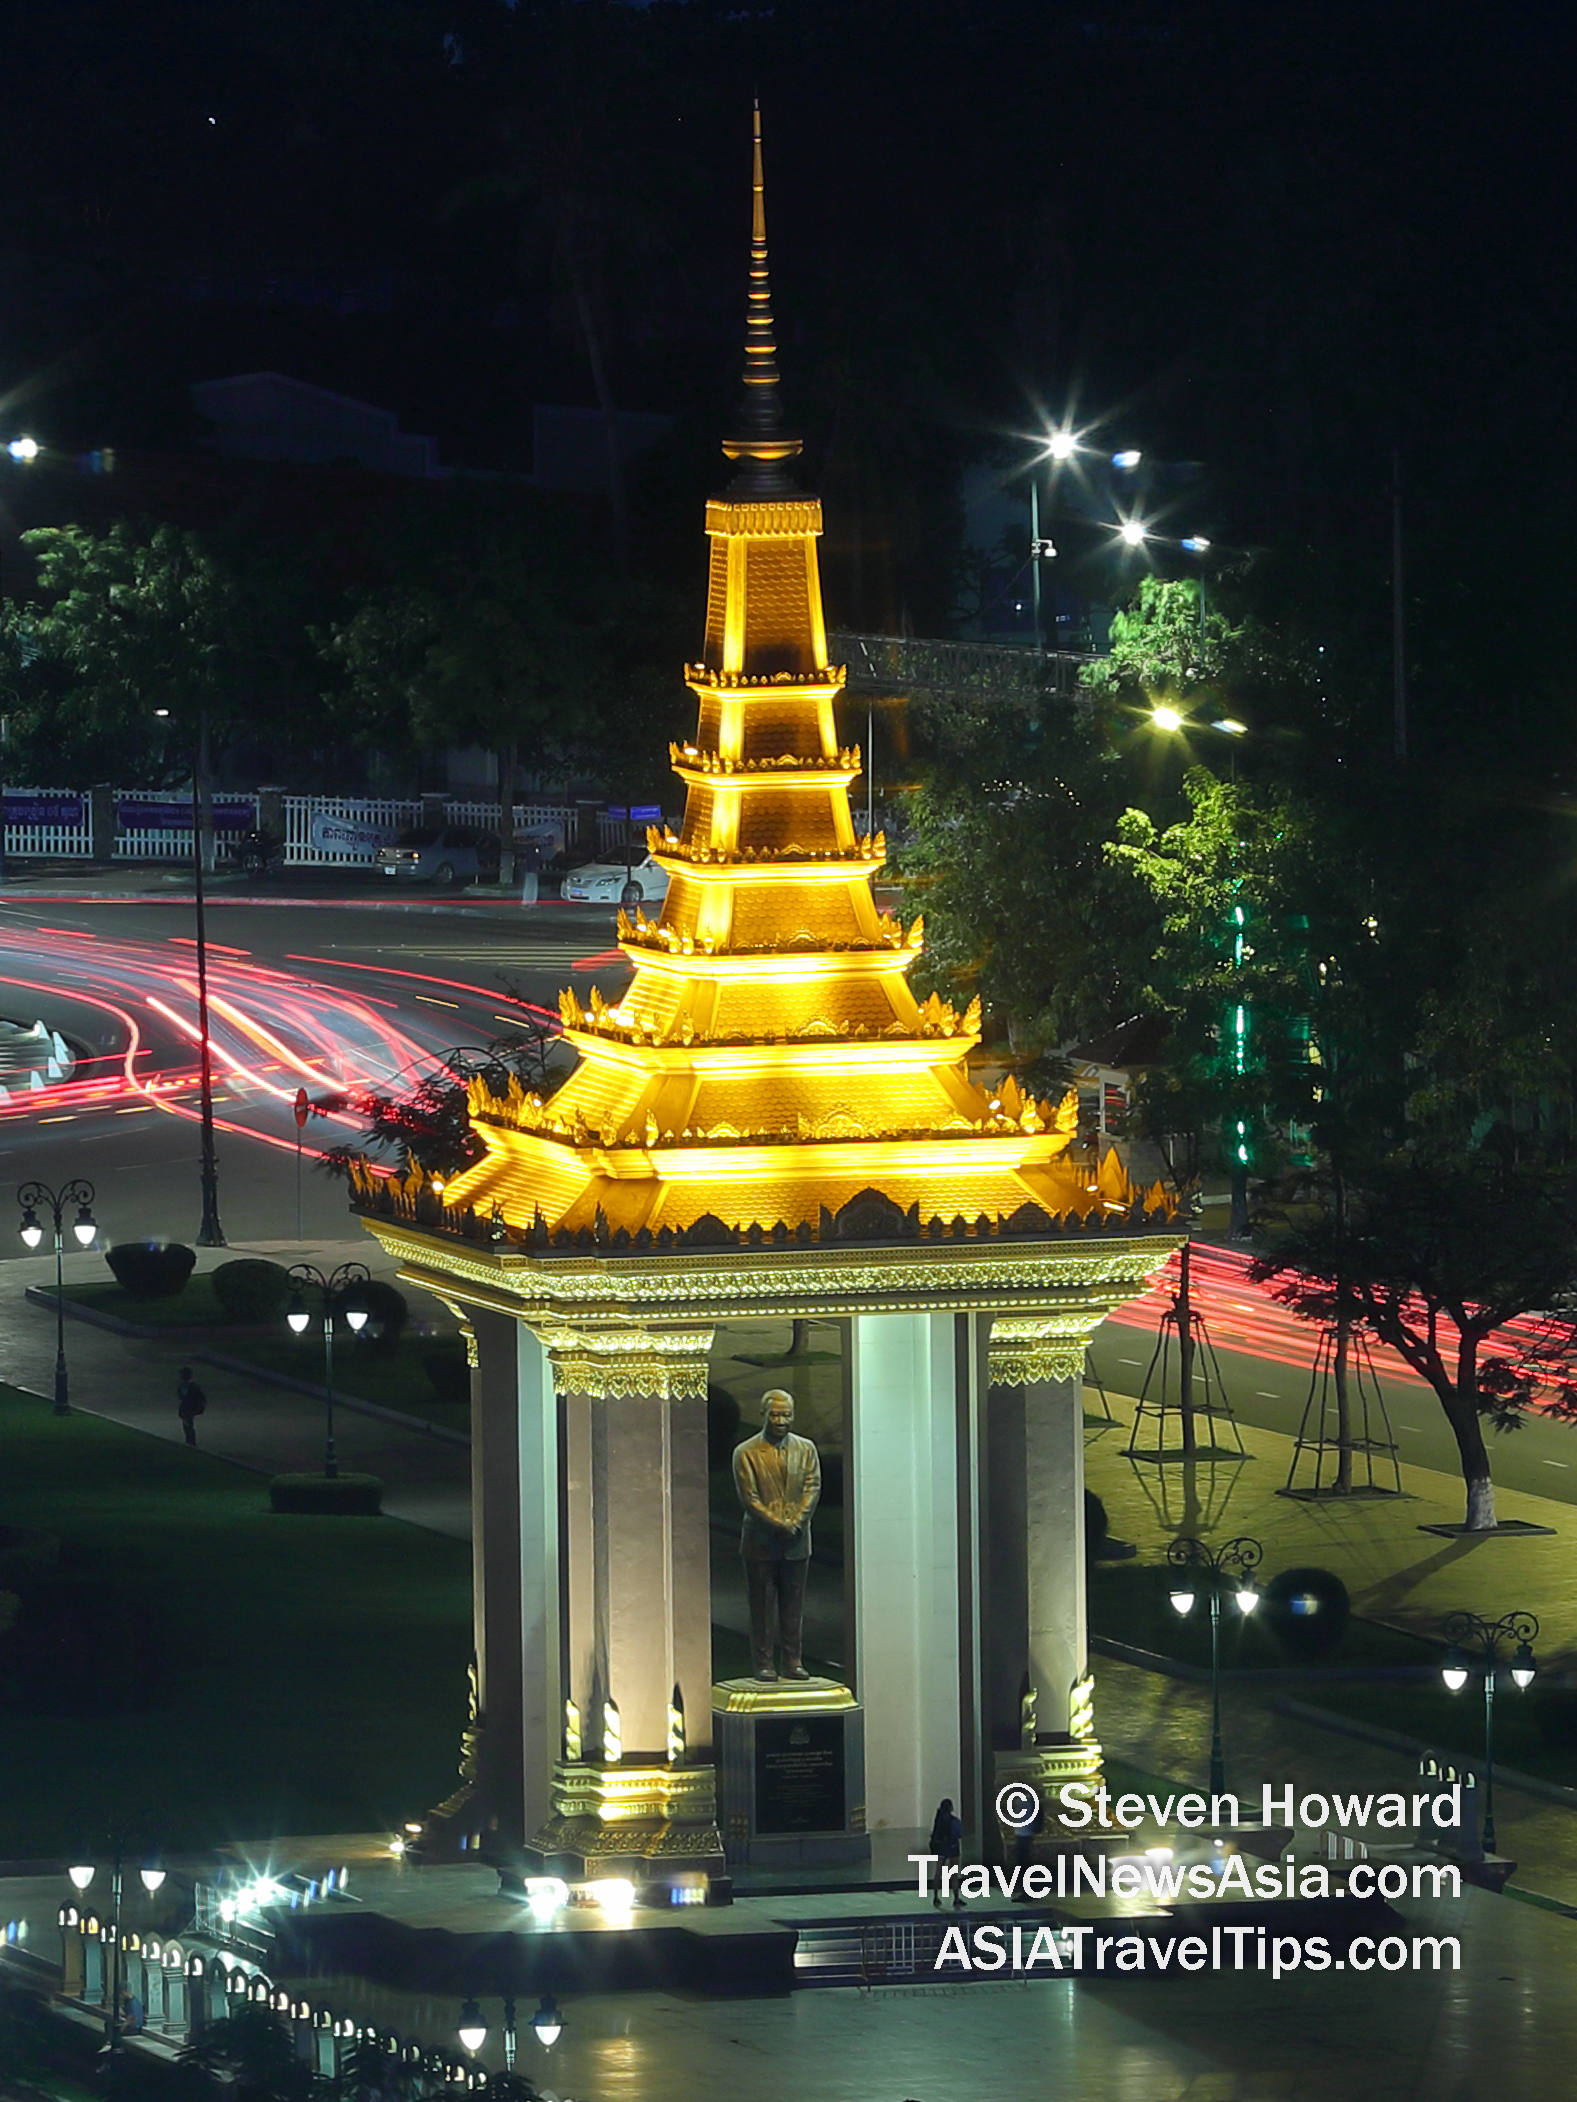 Statue of His Majesty Preah Bat Samdech Preah Norodom Sihanouk at night. Picture by Steven Howard of TravelNewsAsia.com Click to enlarge.